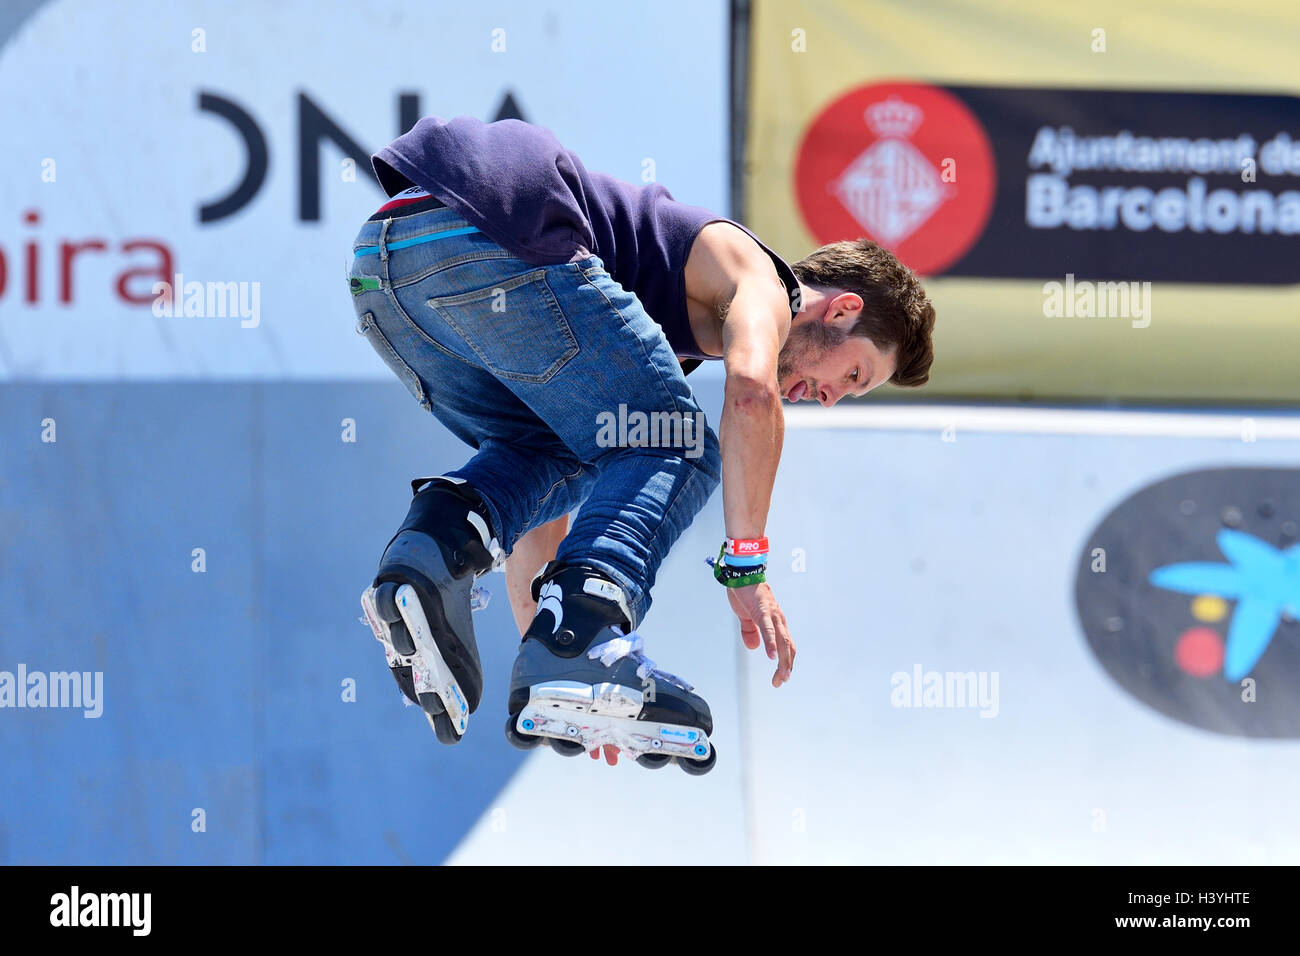 BARCELONA - JUN 28: A professional skater at the inline skating jumps competition at LKXA Extreme Sports Barcelona Games. Stock Photo